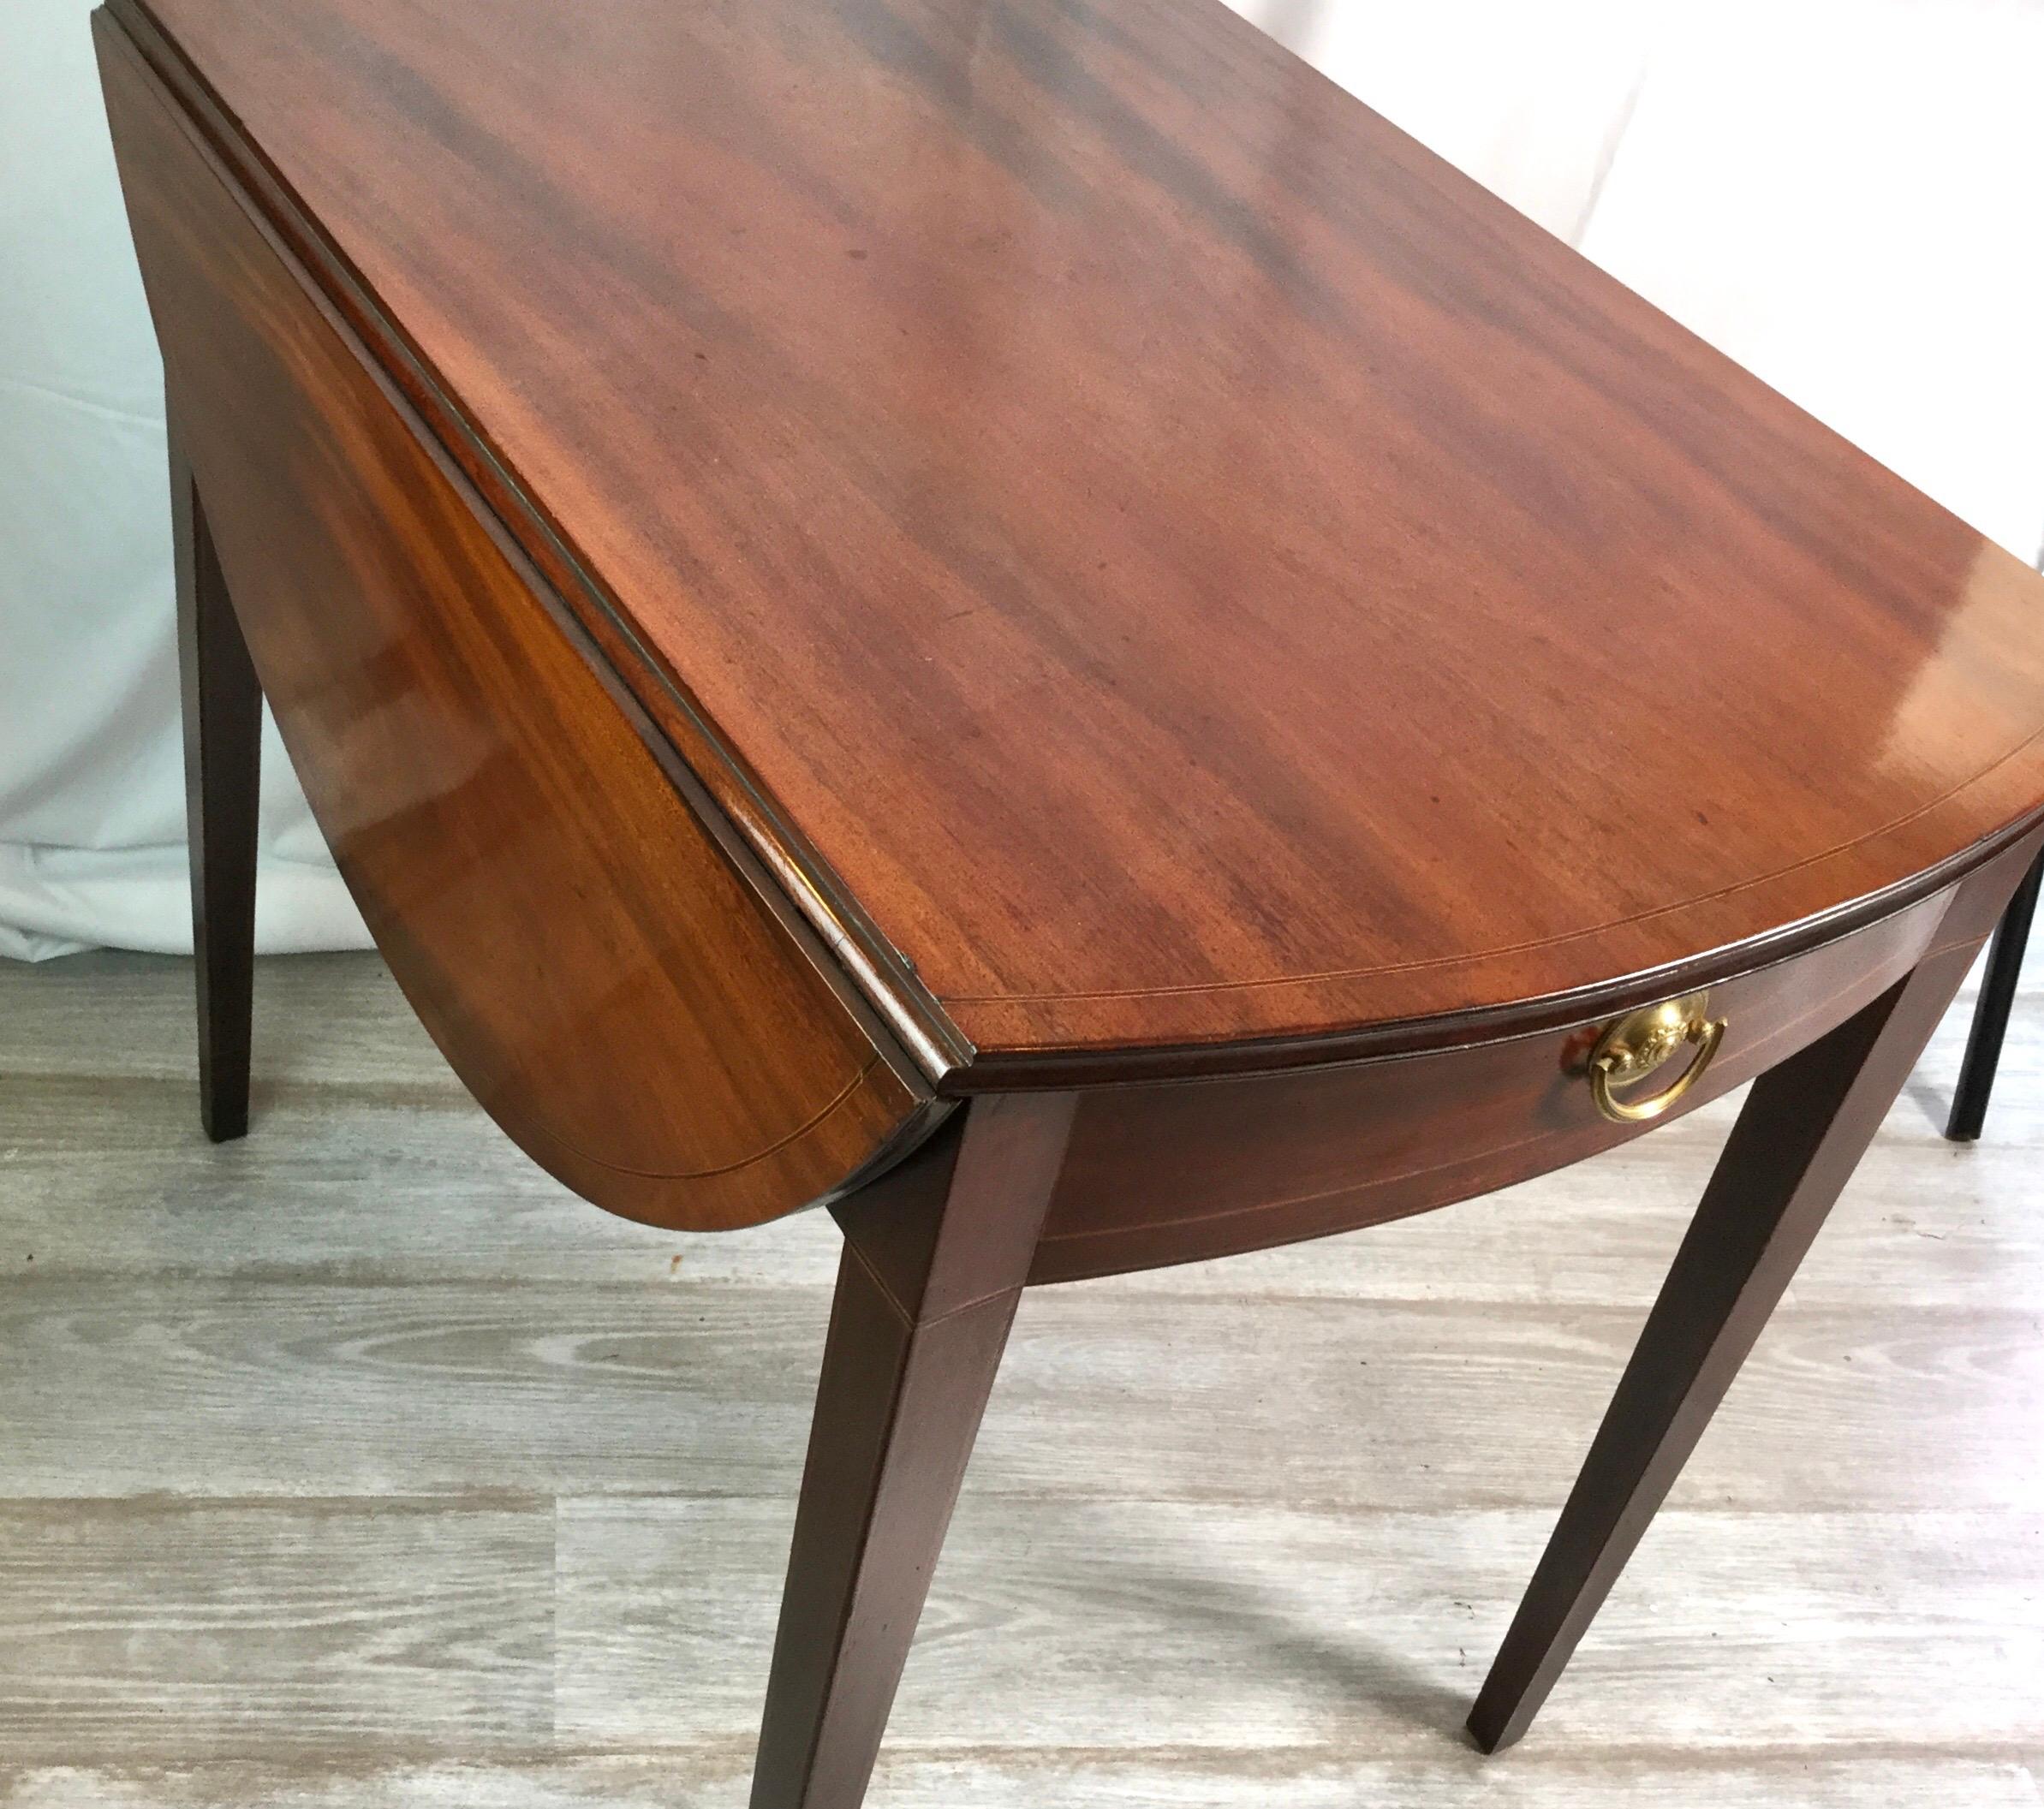 Beautiful mahogany string inlay pembroke table. Single drawer with faux drawer on other side. String inlay on legs and top. Some surface rubs consistent with age and use. Closed 20 1/2